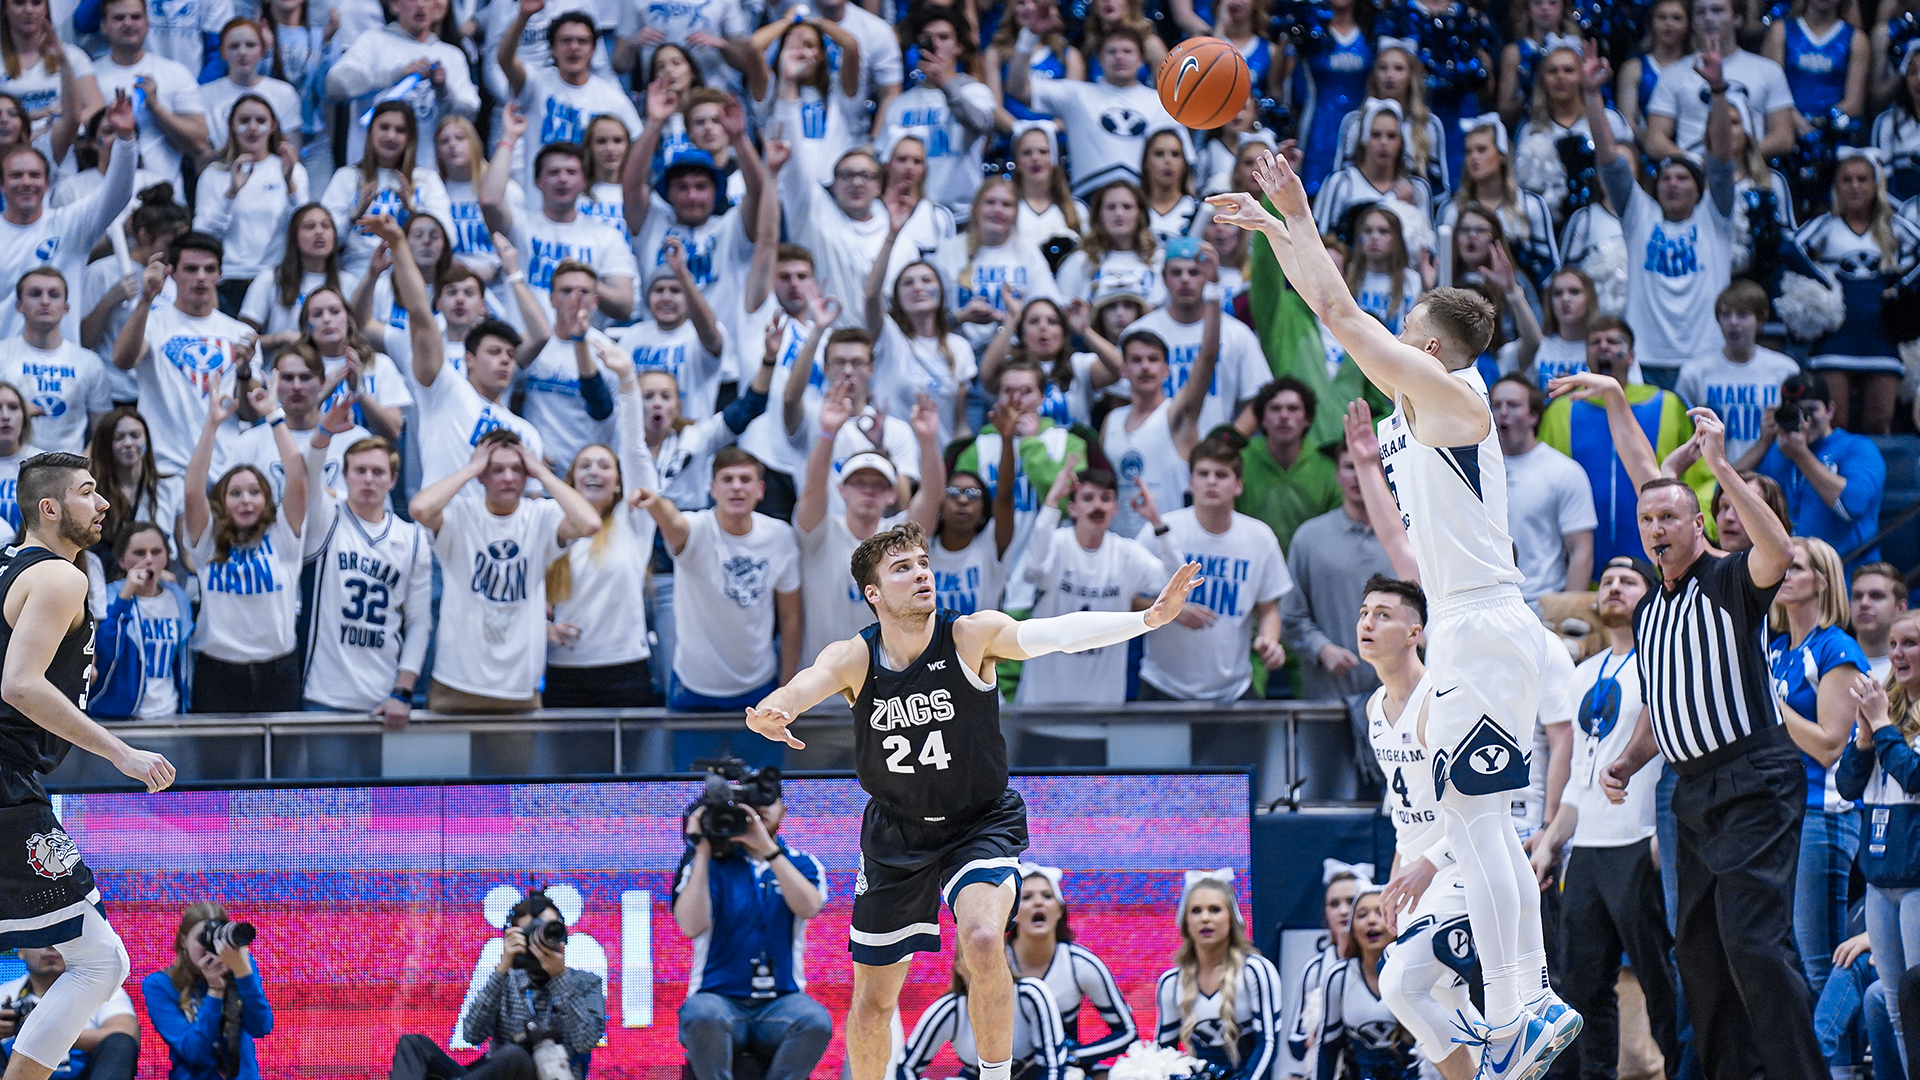 Jake Toolson shoots a 3-pointer from the wing while No. 24 from Gonzaga defends.